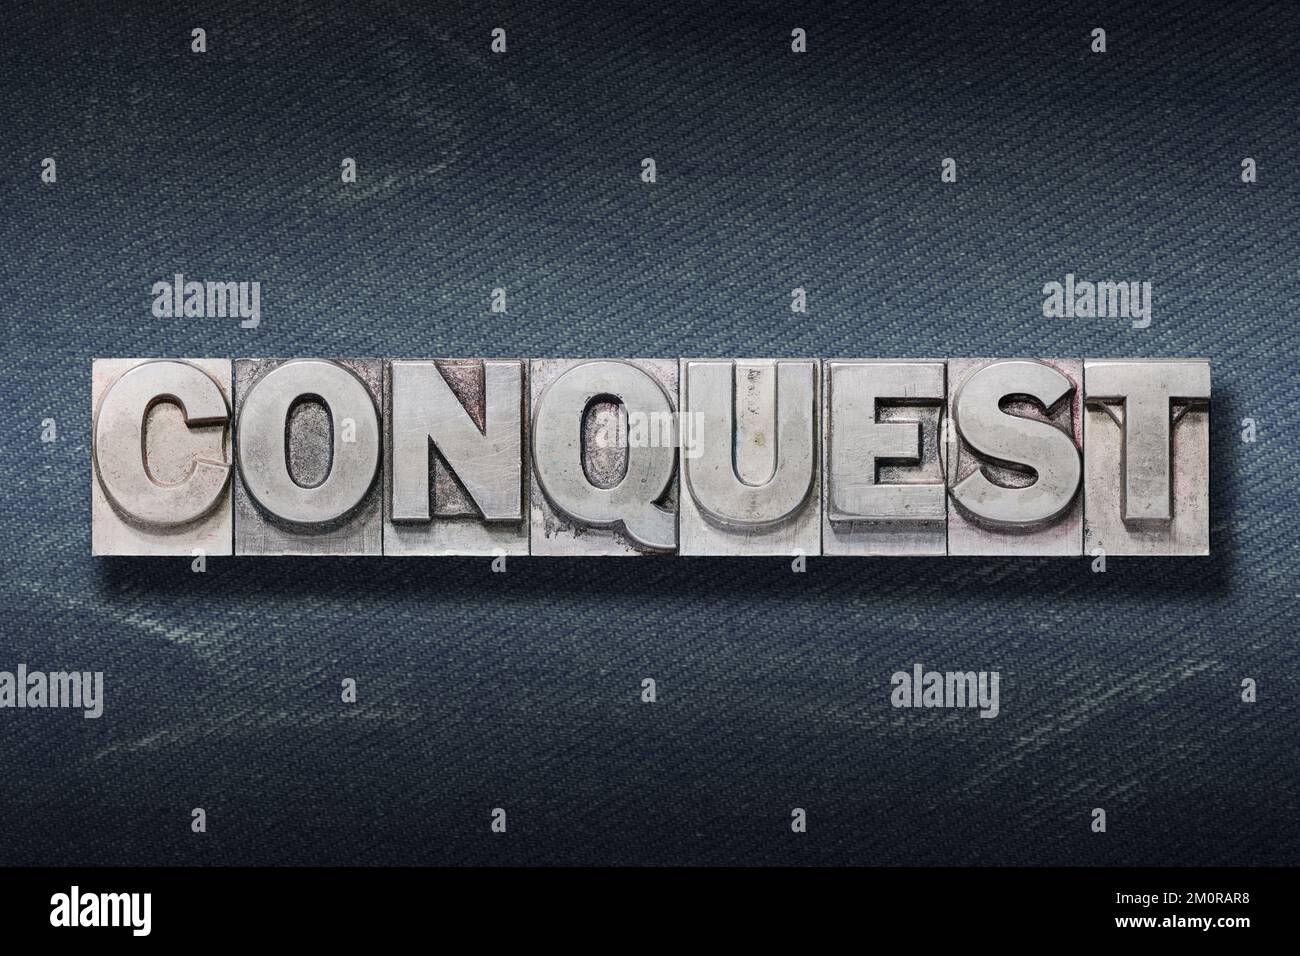 conquest word made from metallic letterpress on dark jeans background Stock Photo